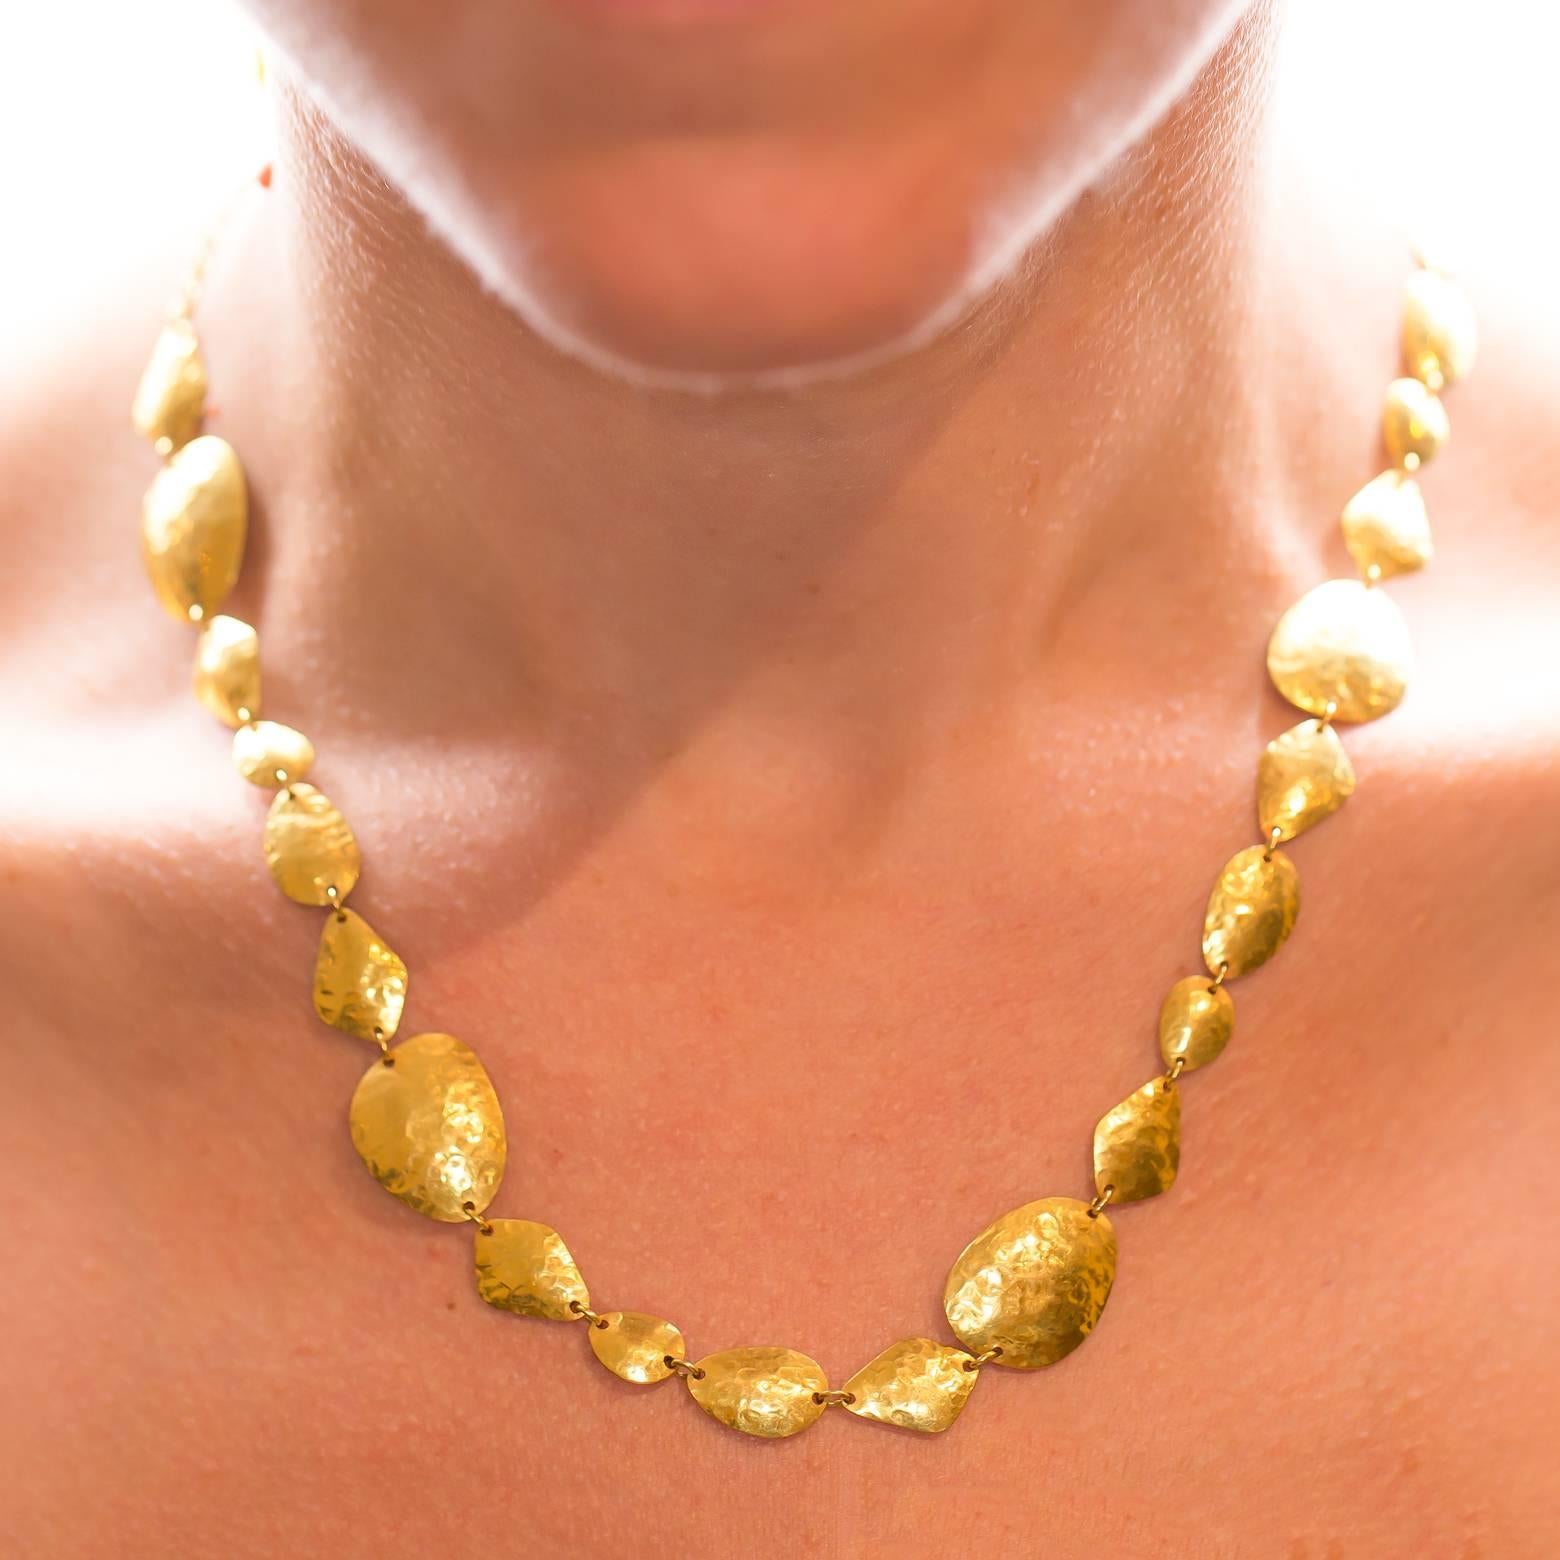 Women's Architectual Gold Necklace with Various Shapes of Hammered Gold Links